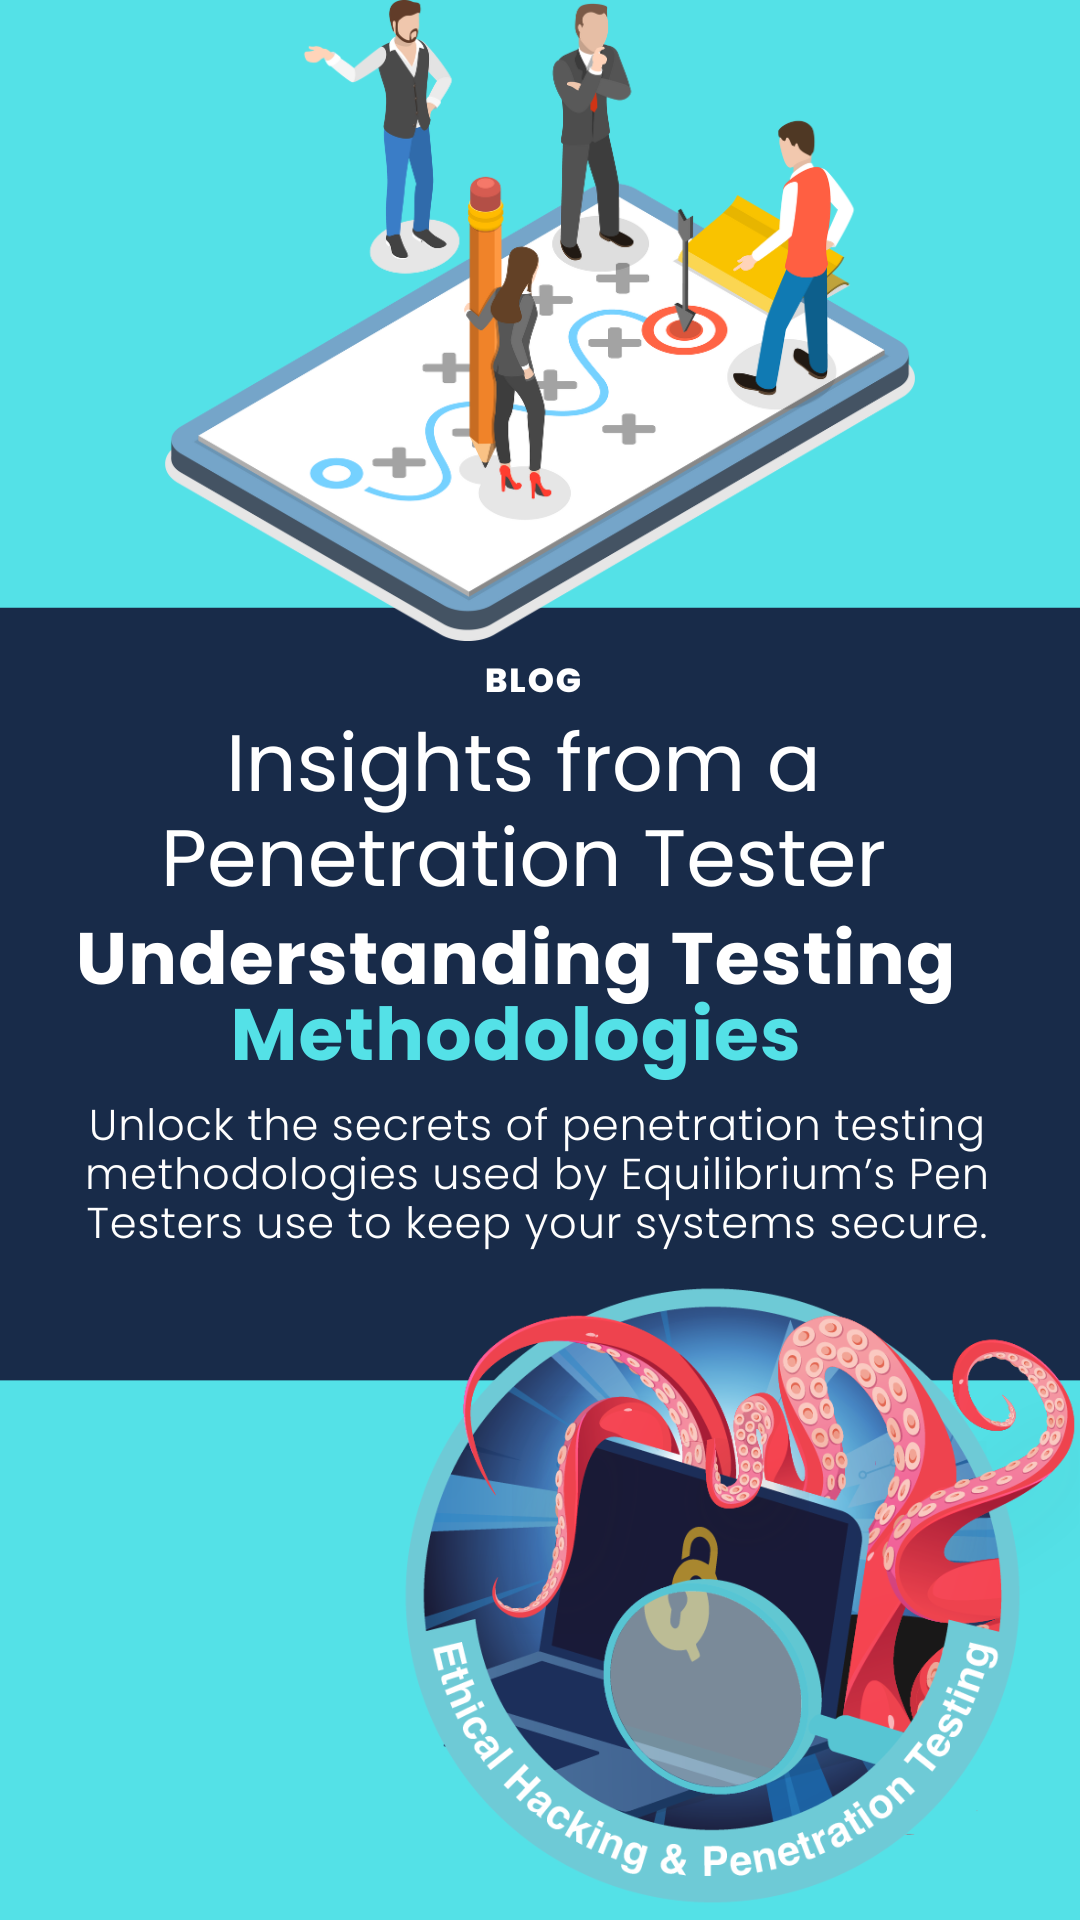 Blog image to promote article which discusses Equilibrium's approach to penetration testing methodologies